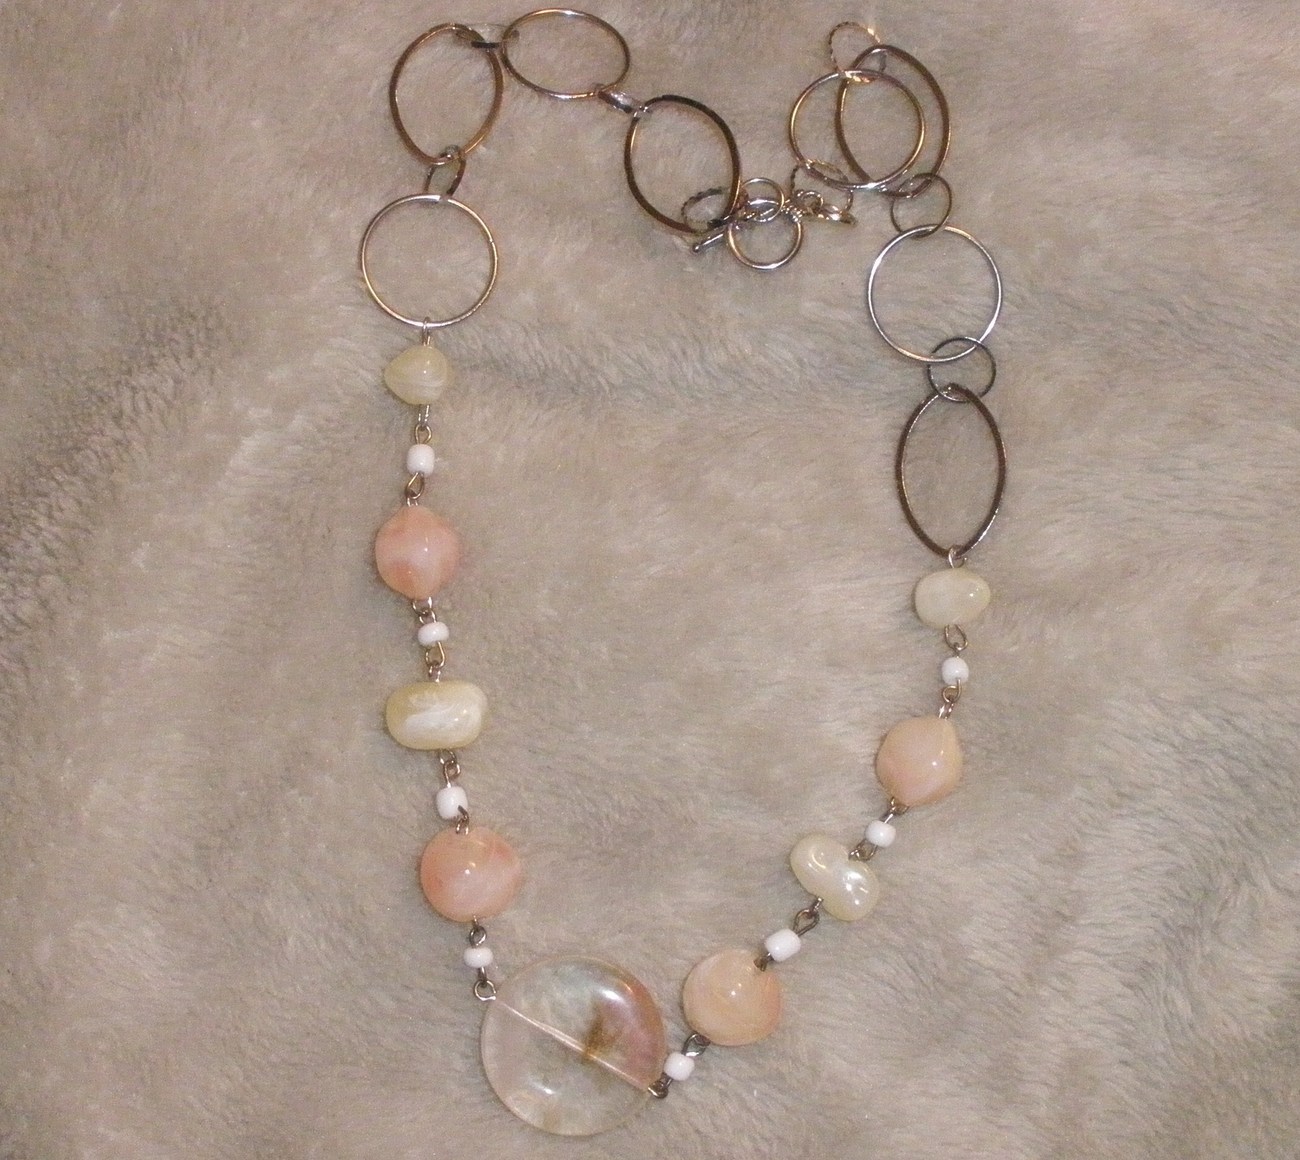 Avon necklace with beads and metal loops new - $9.00